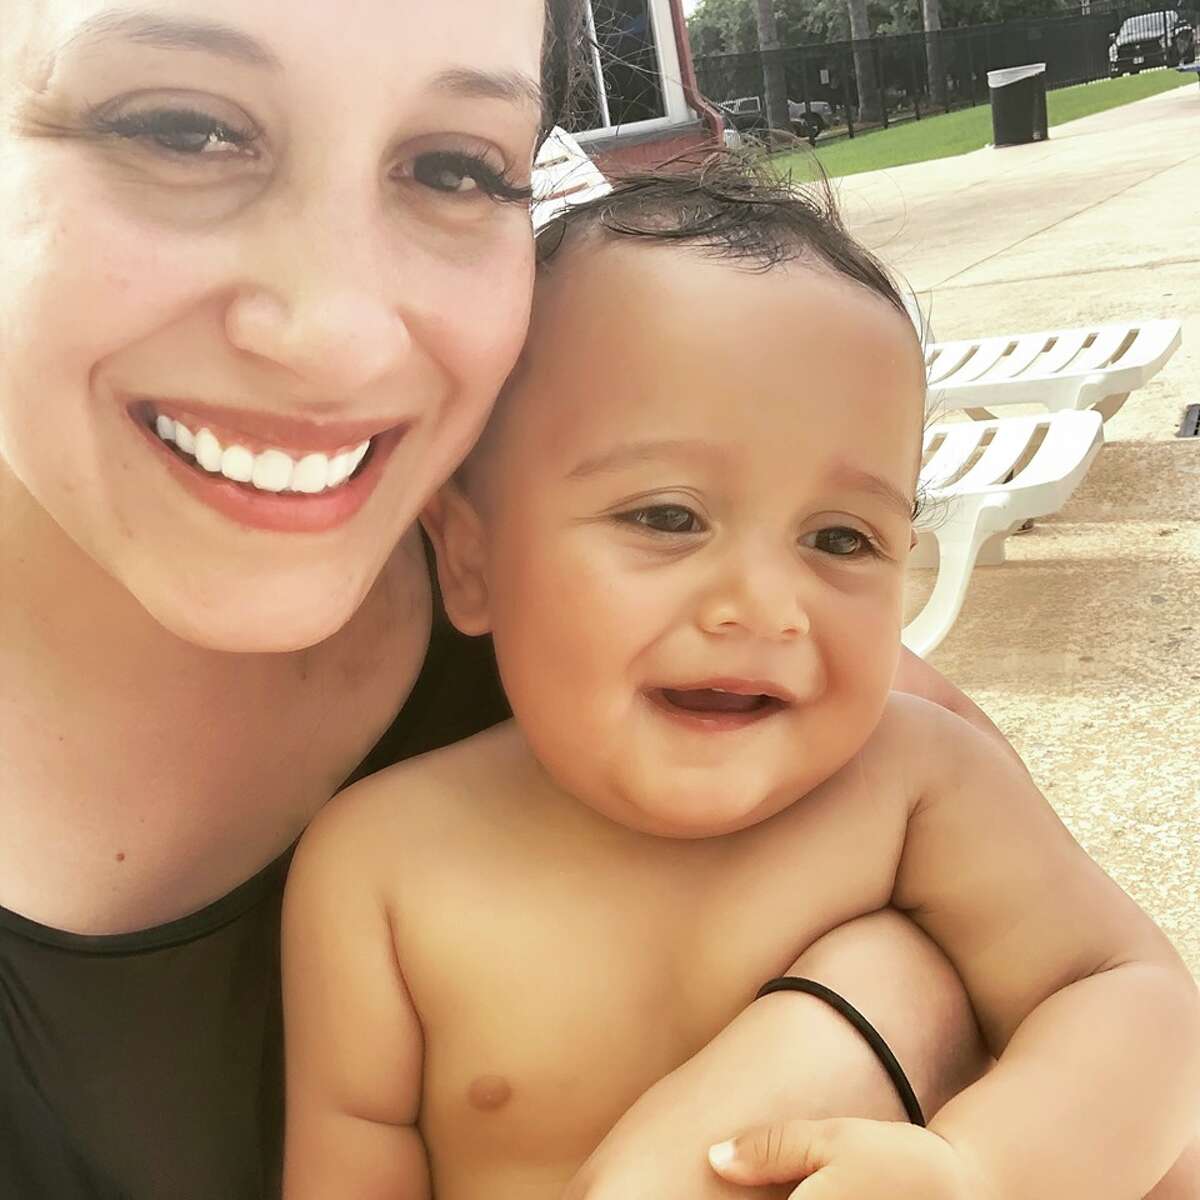 Misty Daugereaux posted on her Facebook page, "I got kicked out of Nessler Family Aquatica In TEXAS CITY today for BREASTFEEDING MY SON!" >>Celebrities who breastfeed